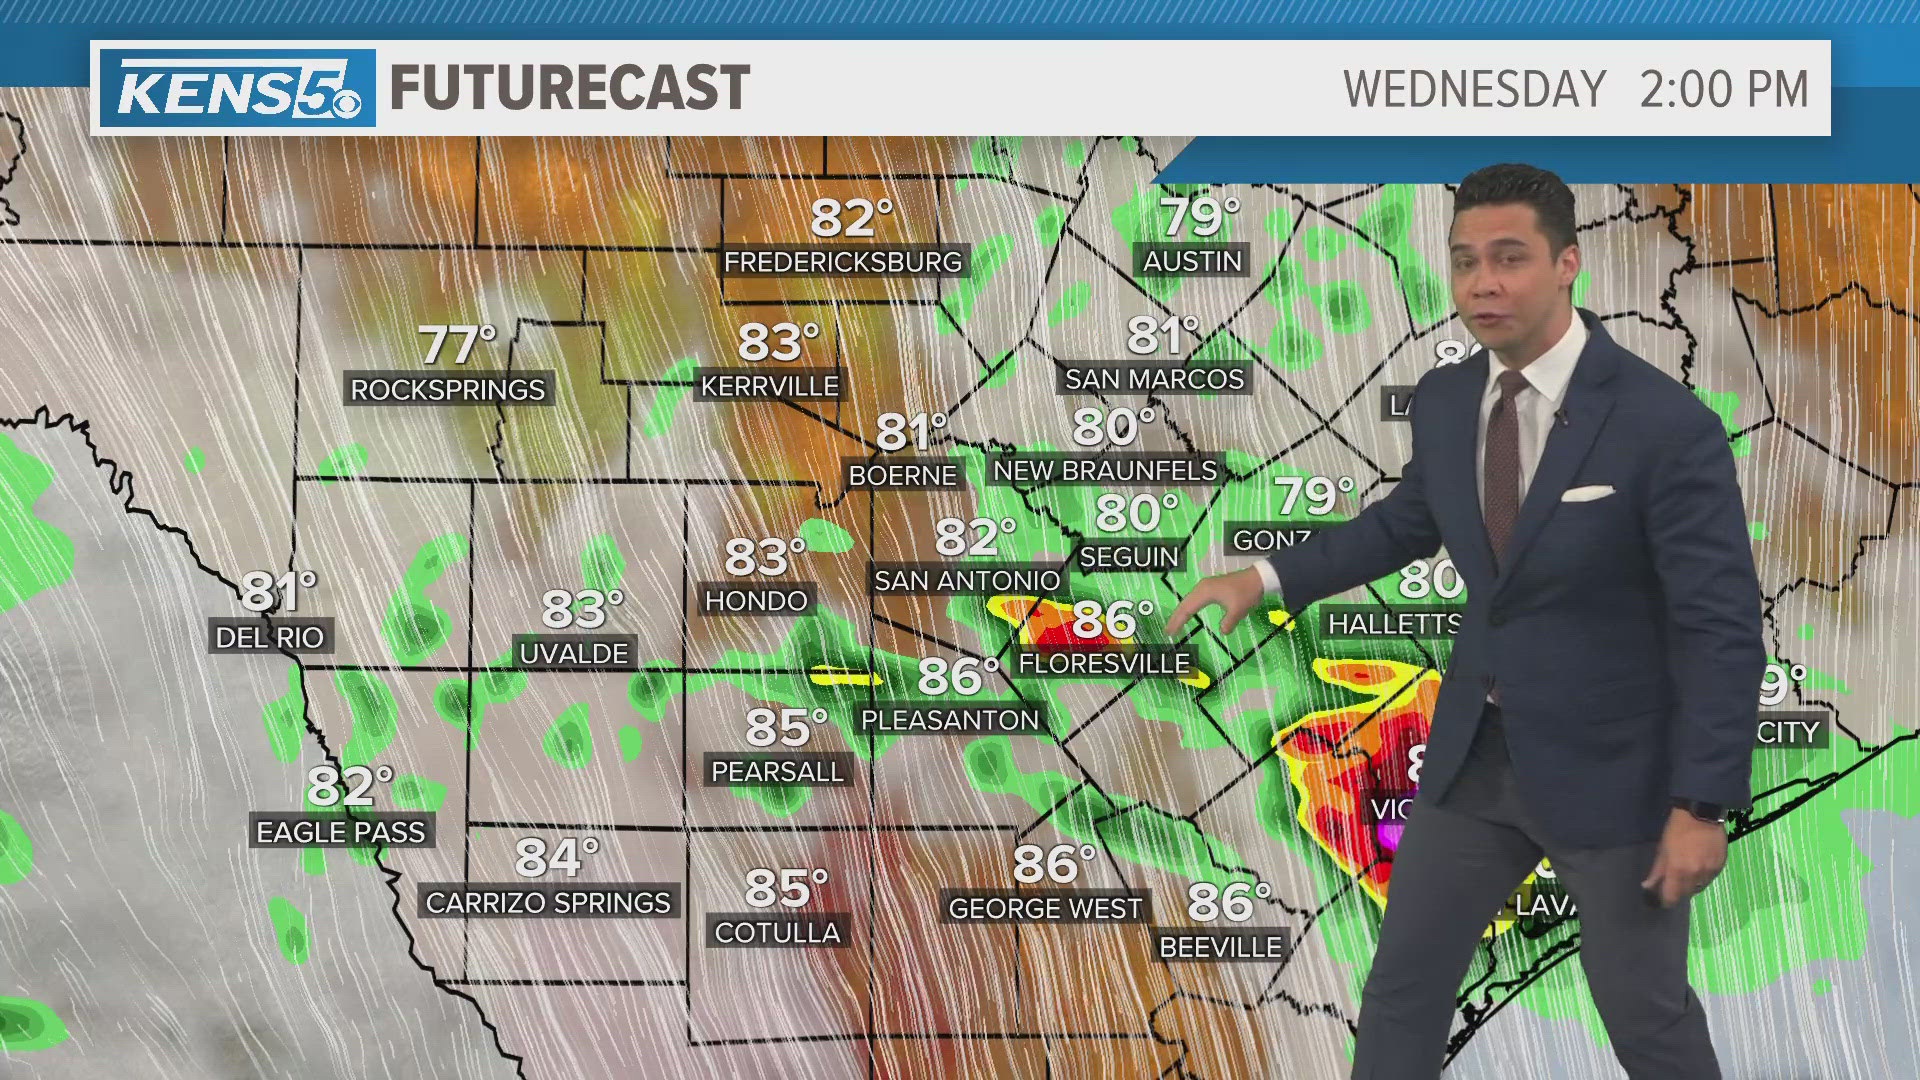 Meteorologist Ryan Shoptaugh has the full forecast for Wednesday, May 1.